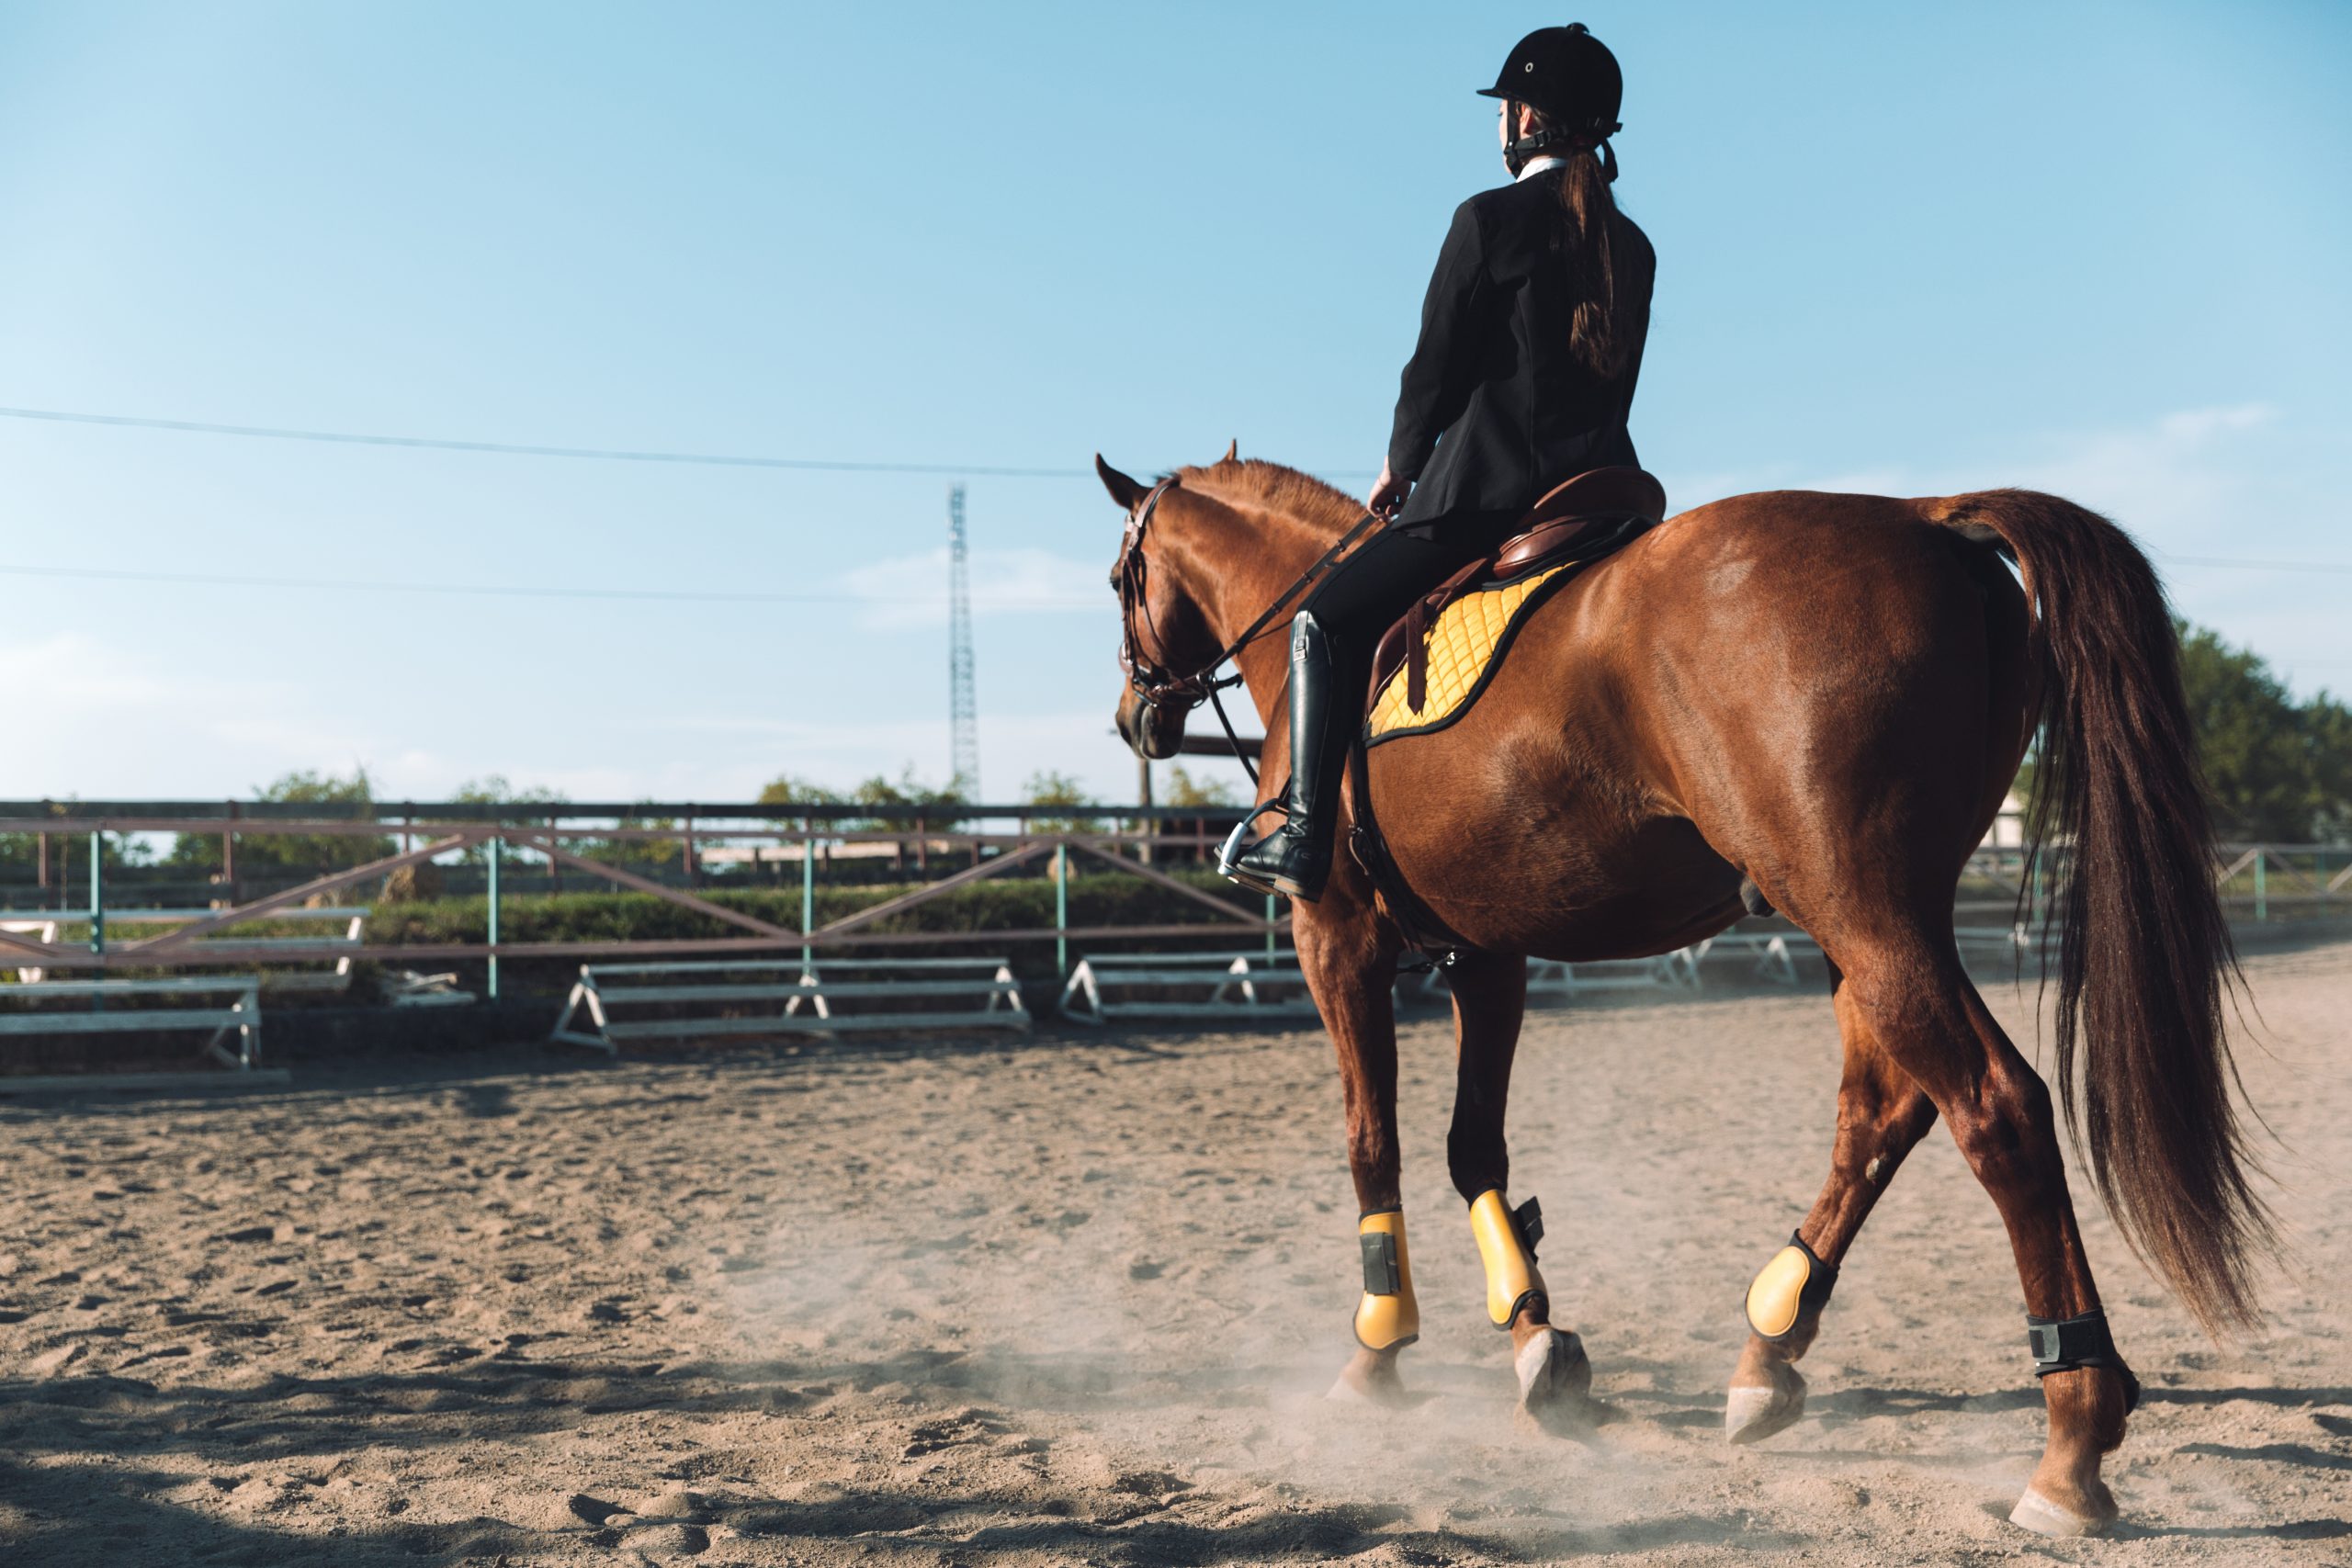 “The horse doesn’t listen to me” – the most common mistakes made in the saddle